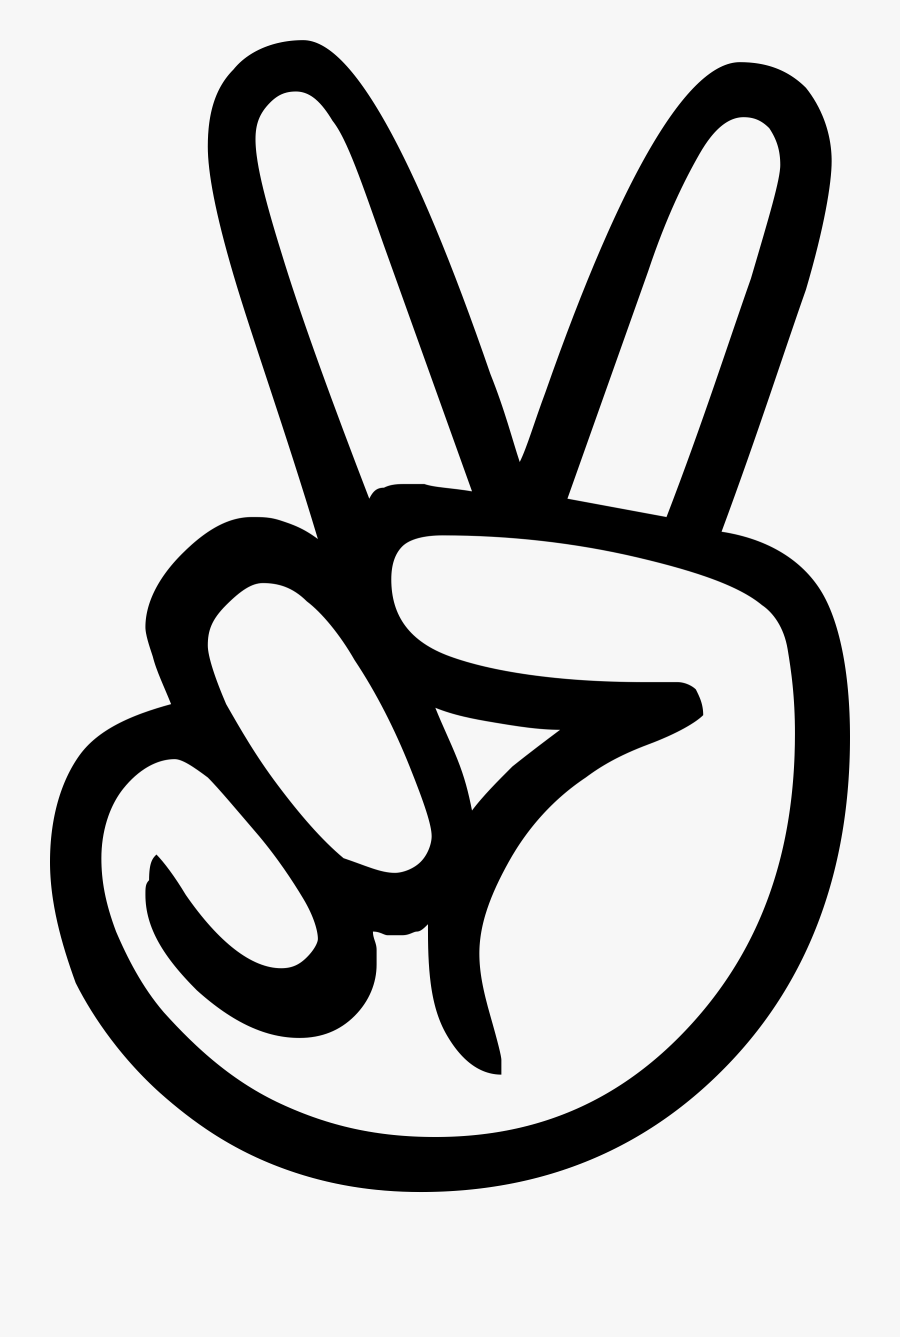 Peace Sign Fingers Outline - Peace Sign Hand , Free Transparent Clipart